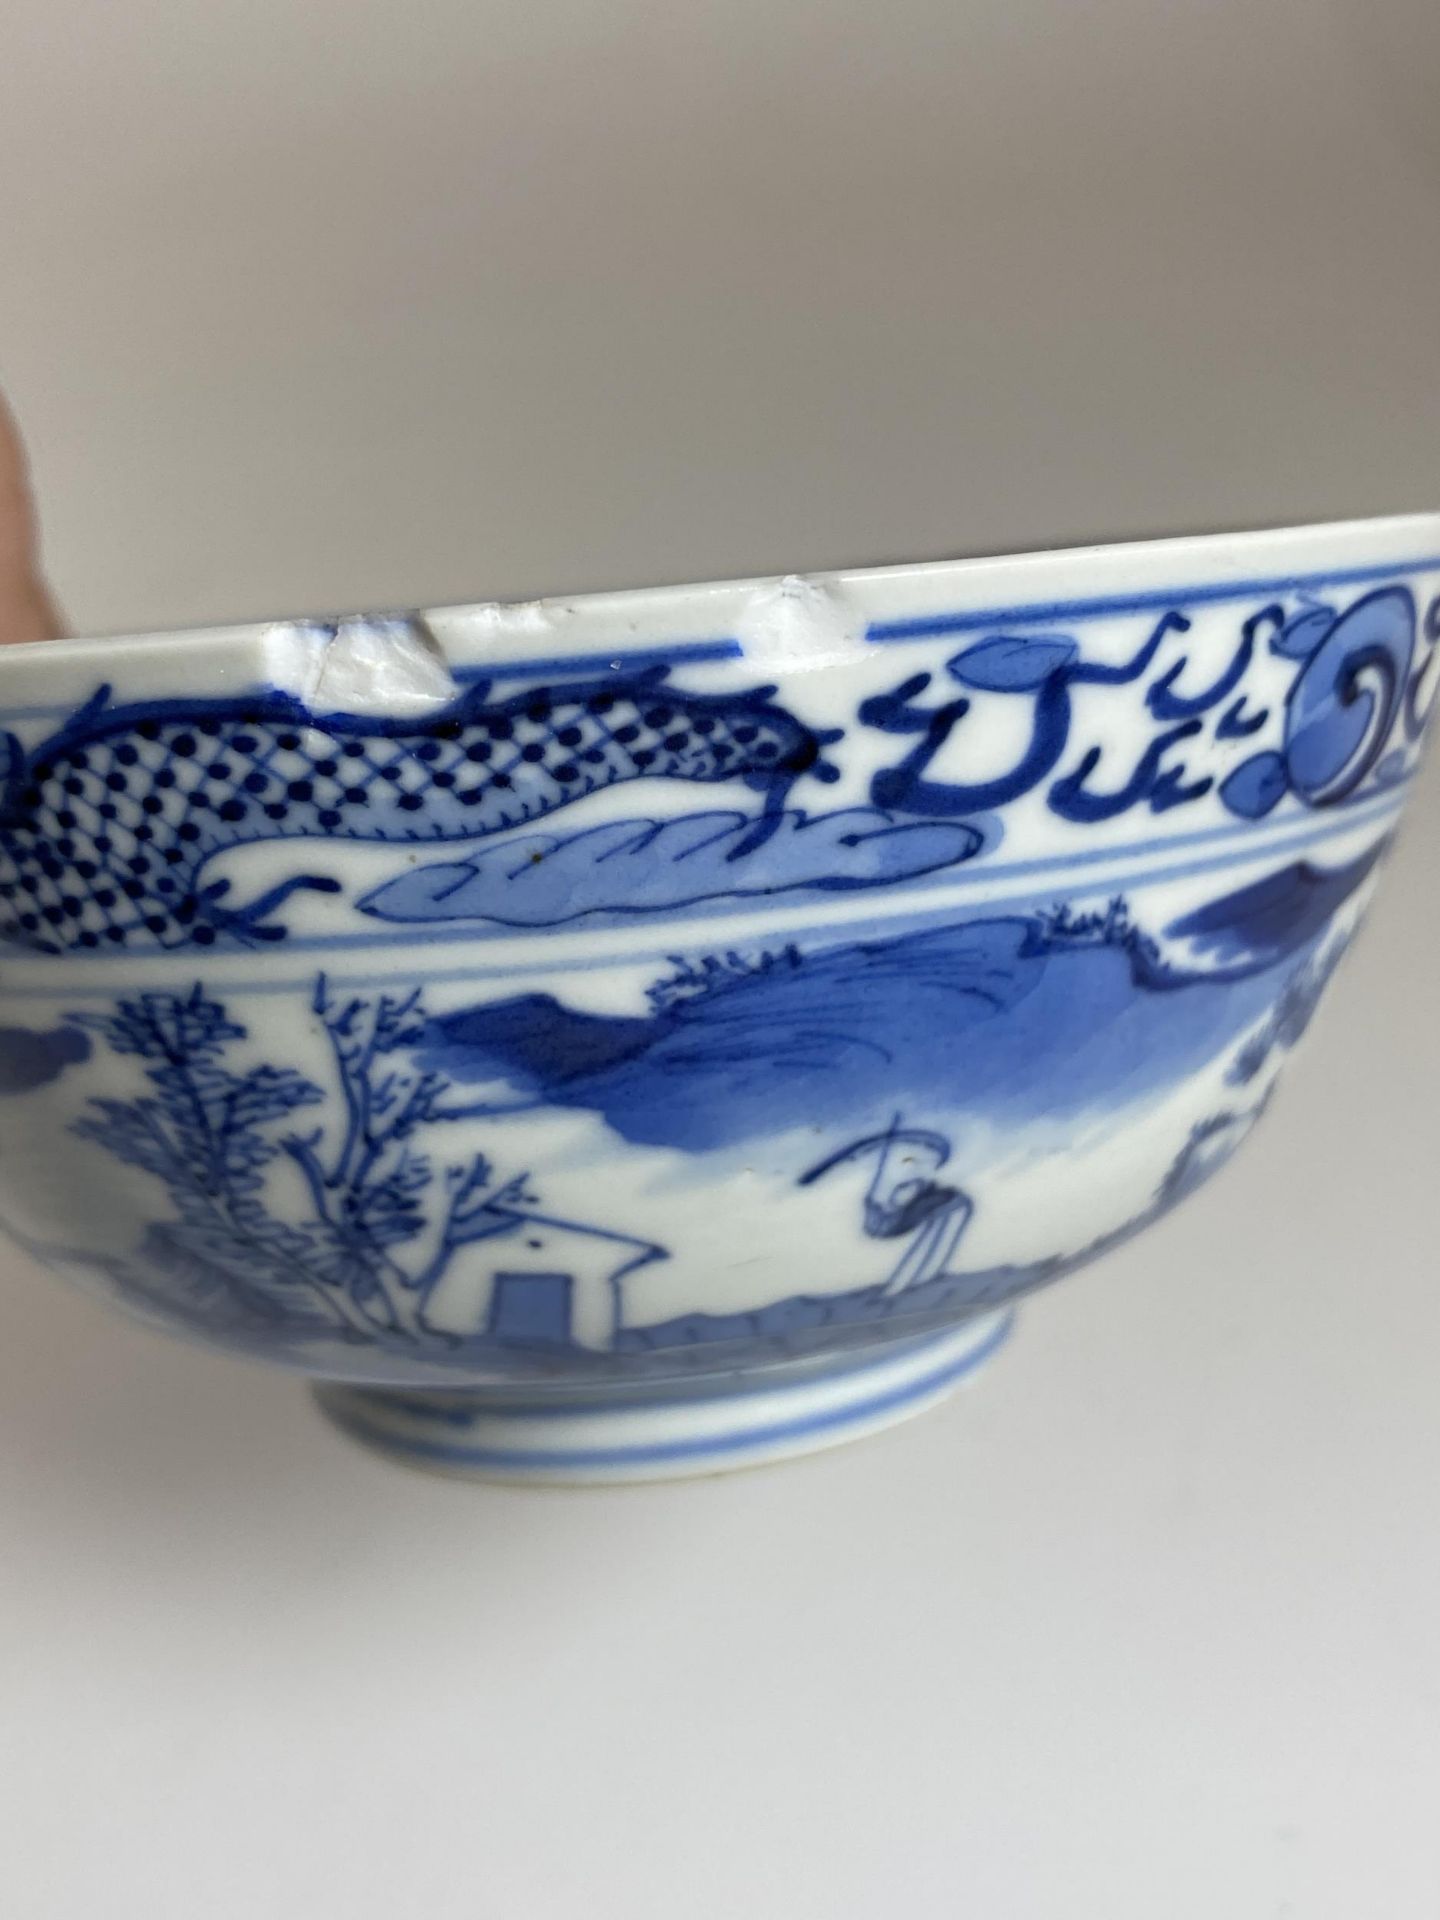 A LATE 19TH CENTURY CHINESE KANGXI REVIVAL BLUE AND WHITE PORCELAIN BOWL WITH DRAGON IN THE CLOUDS - Image 6 of 7